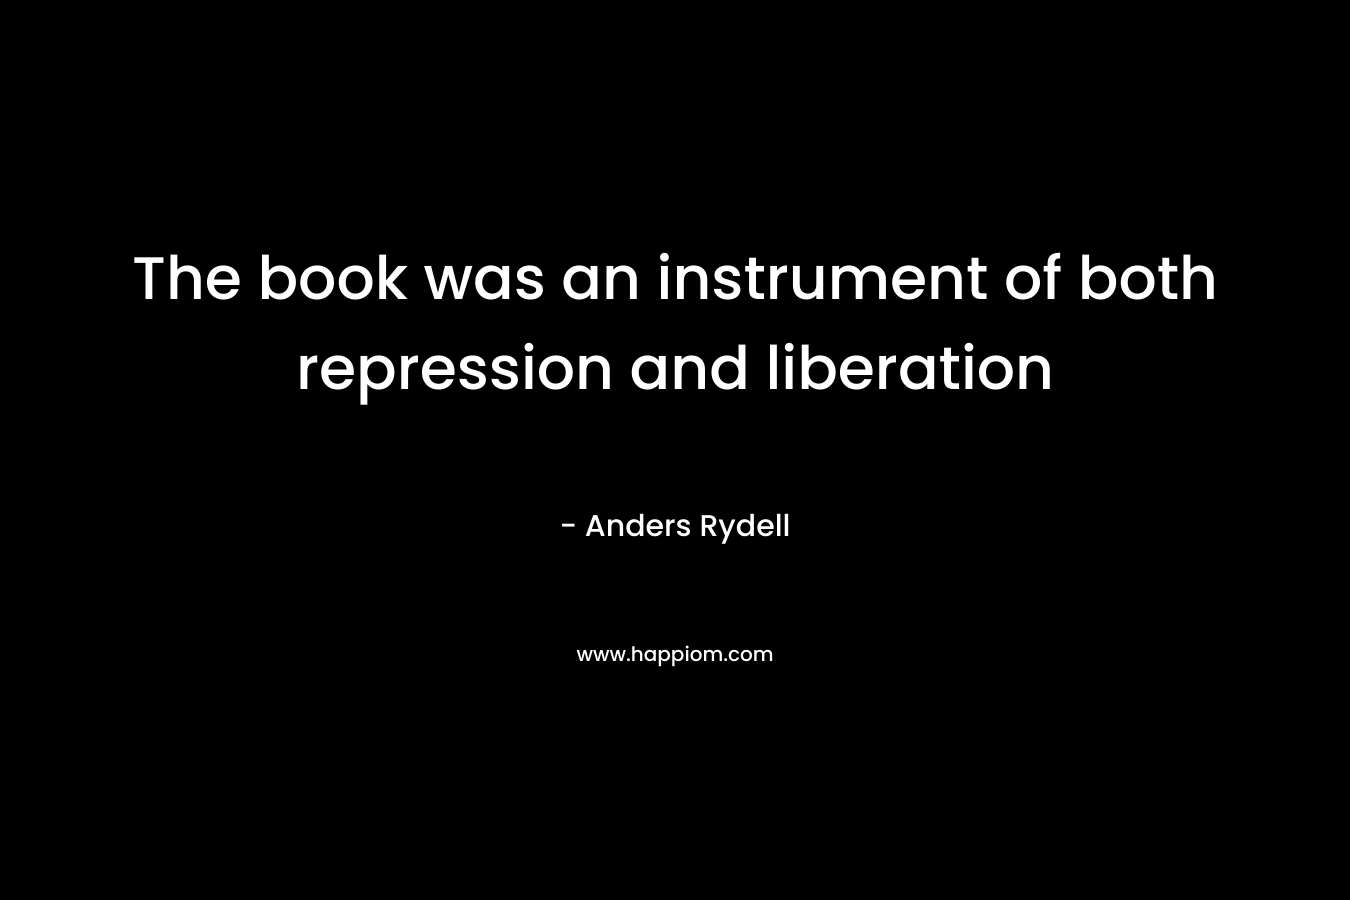 The book was an instrument of both repression and liberation